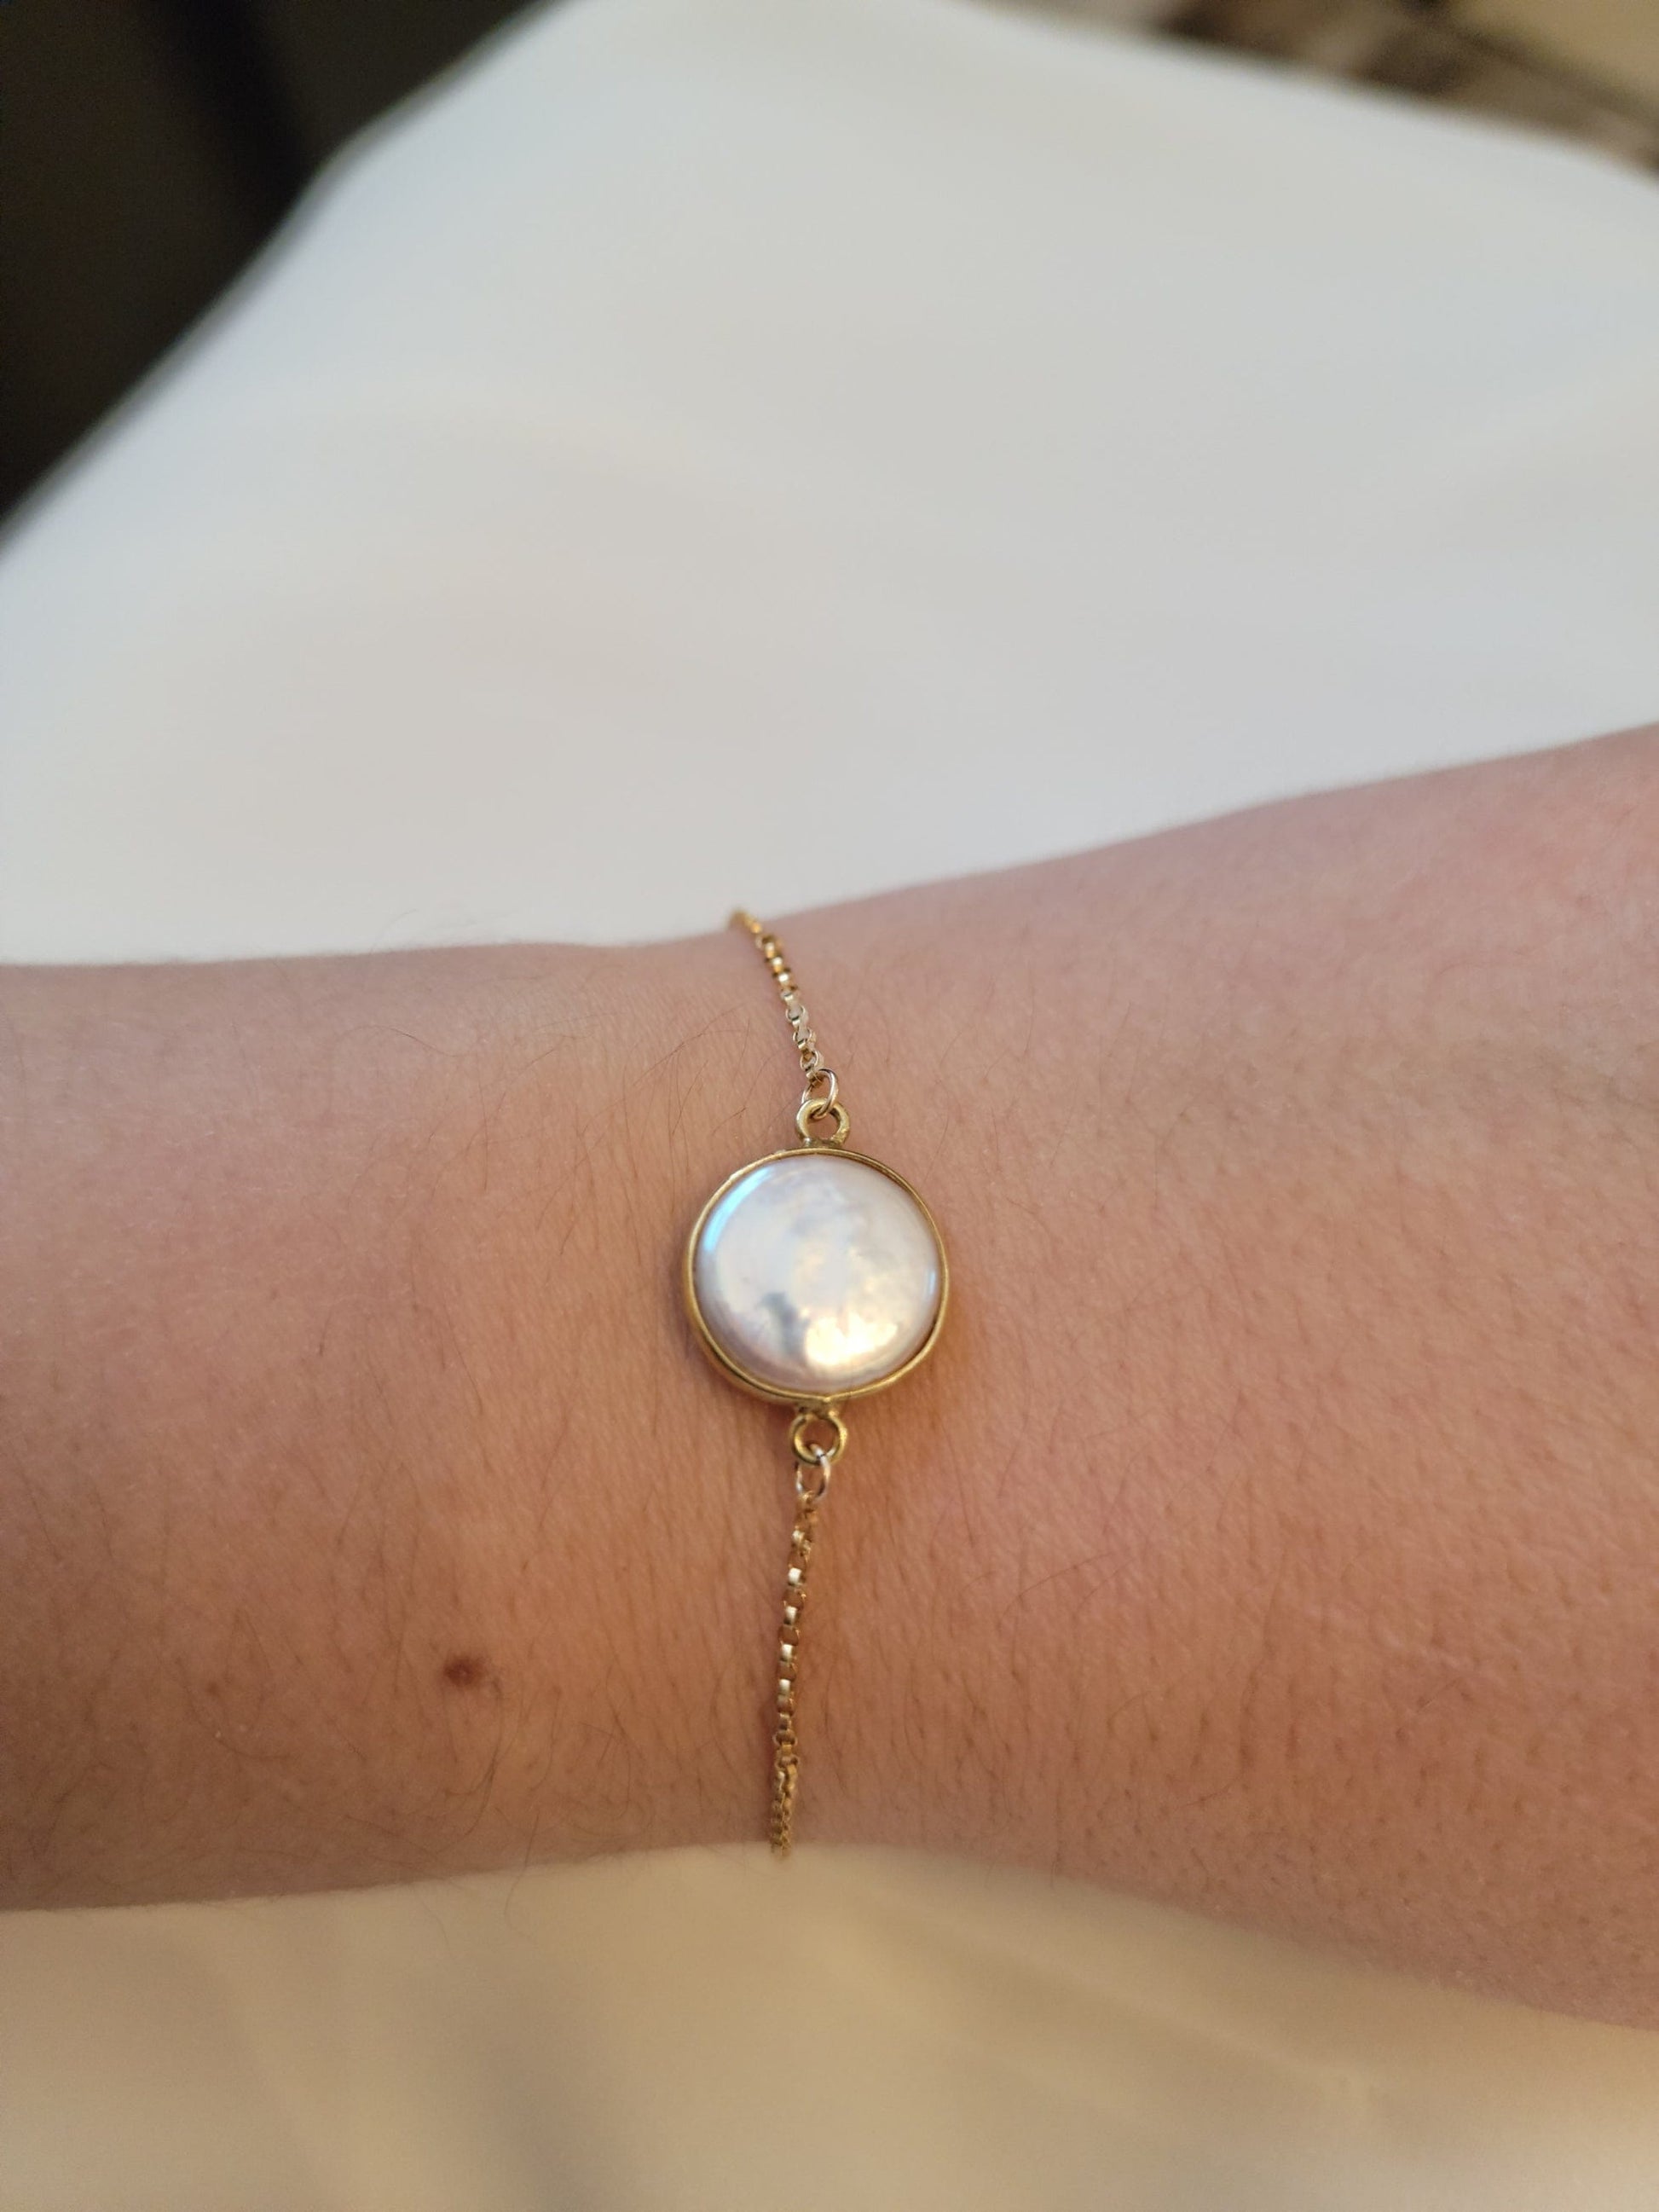 Coin pearl with gold plated bezel hand assembled on gold filled adjustable bracelet. 